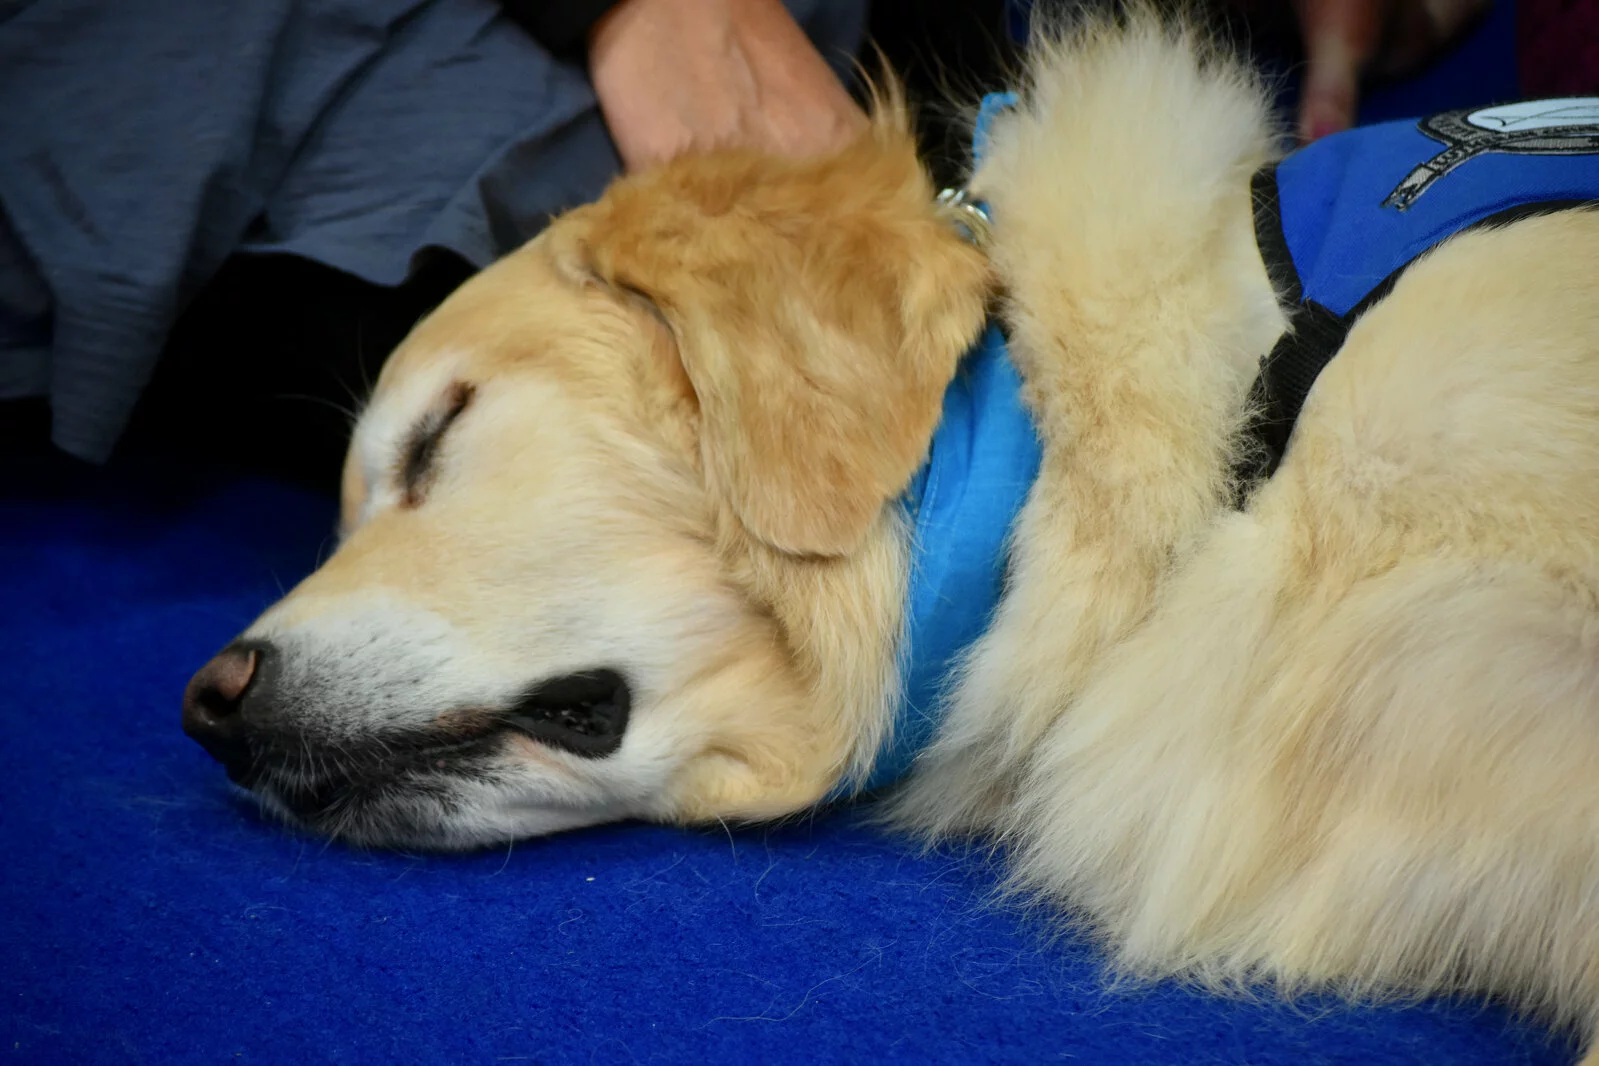 Students pet the golden retriever dog who is laying on the rug